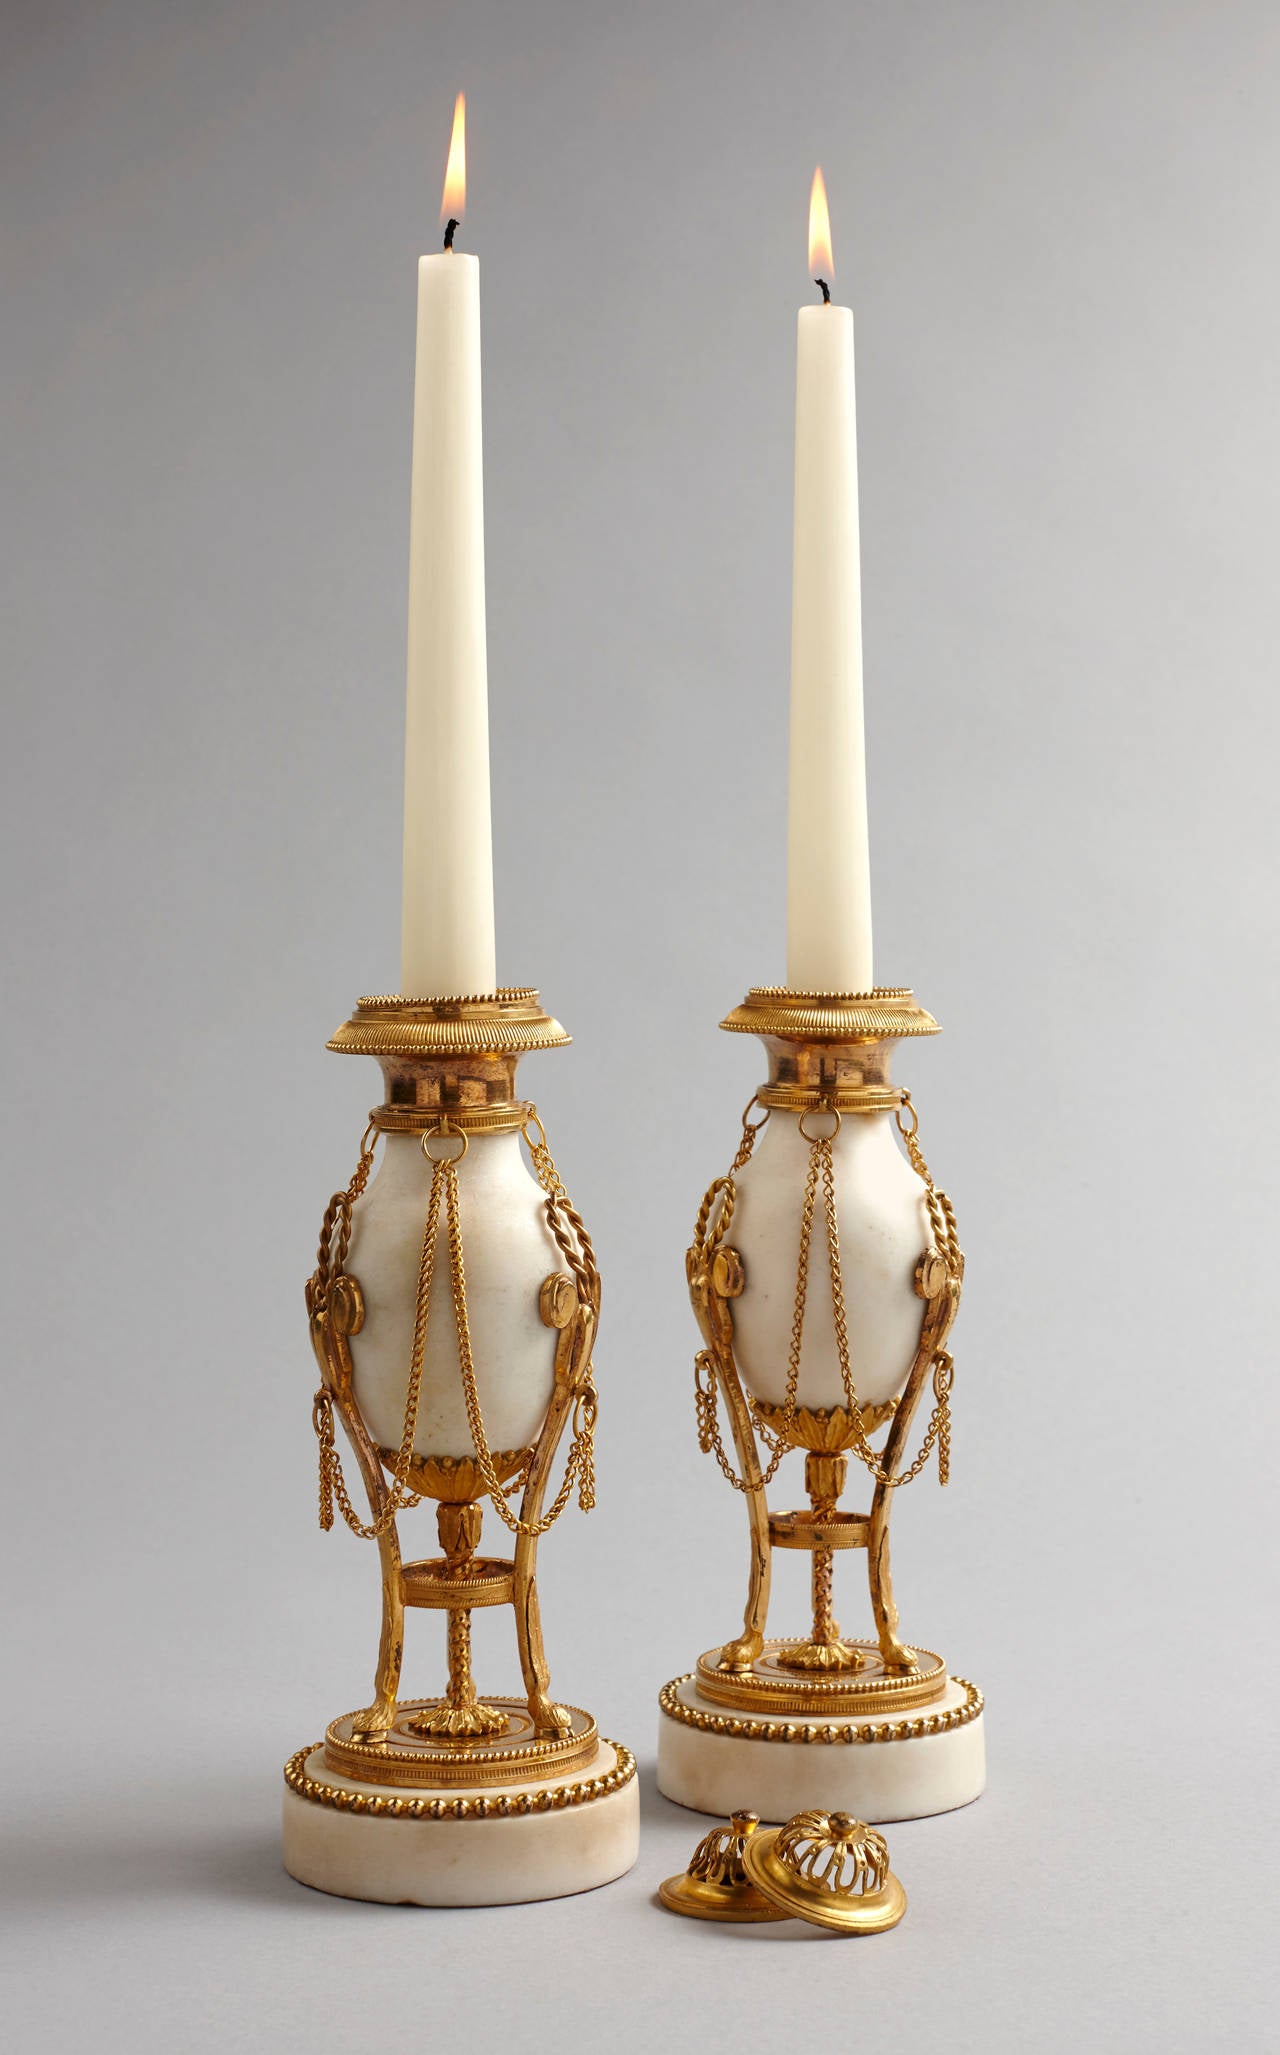 A fine pair of Louis XVI white marble and gilt bronze cassolettes in the form of atheniennes. Each with a domed and pierced cover to reveal the candleholder, the egg ovoid shaped white marble body with ormolu chain swags and supported by three hoove